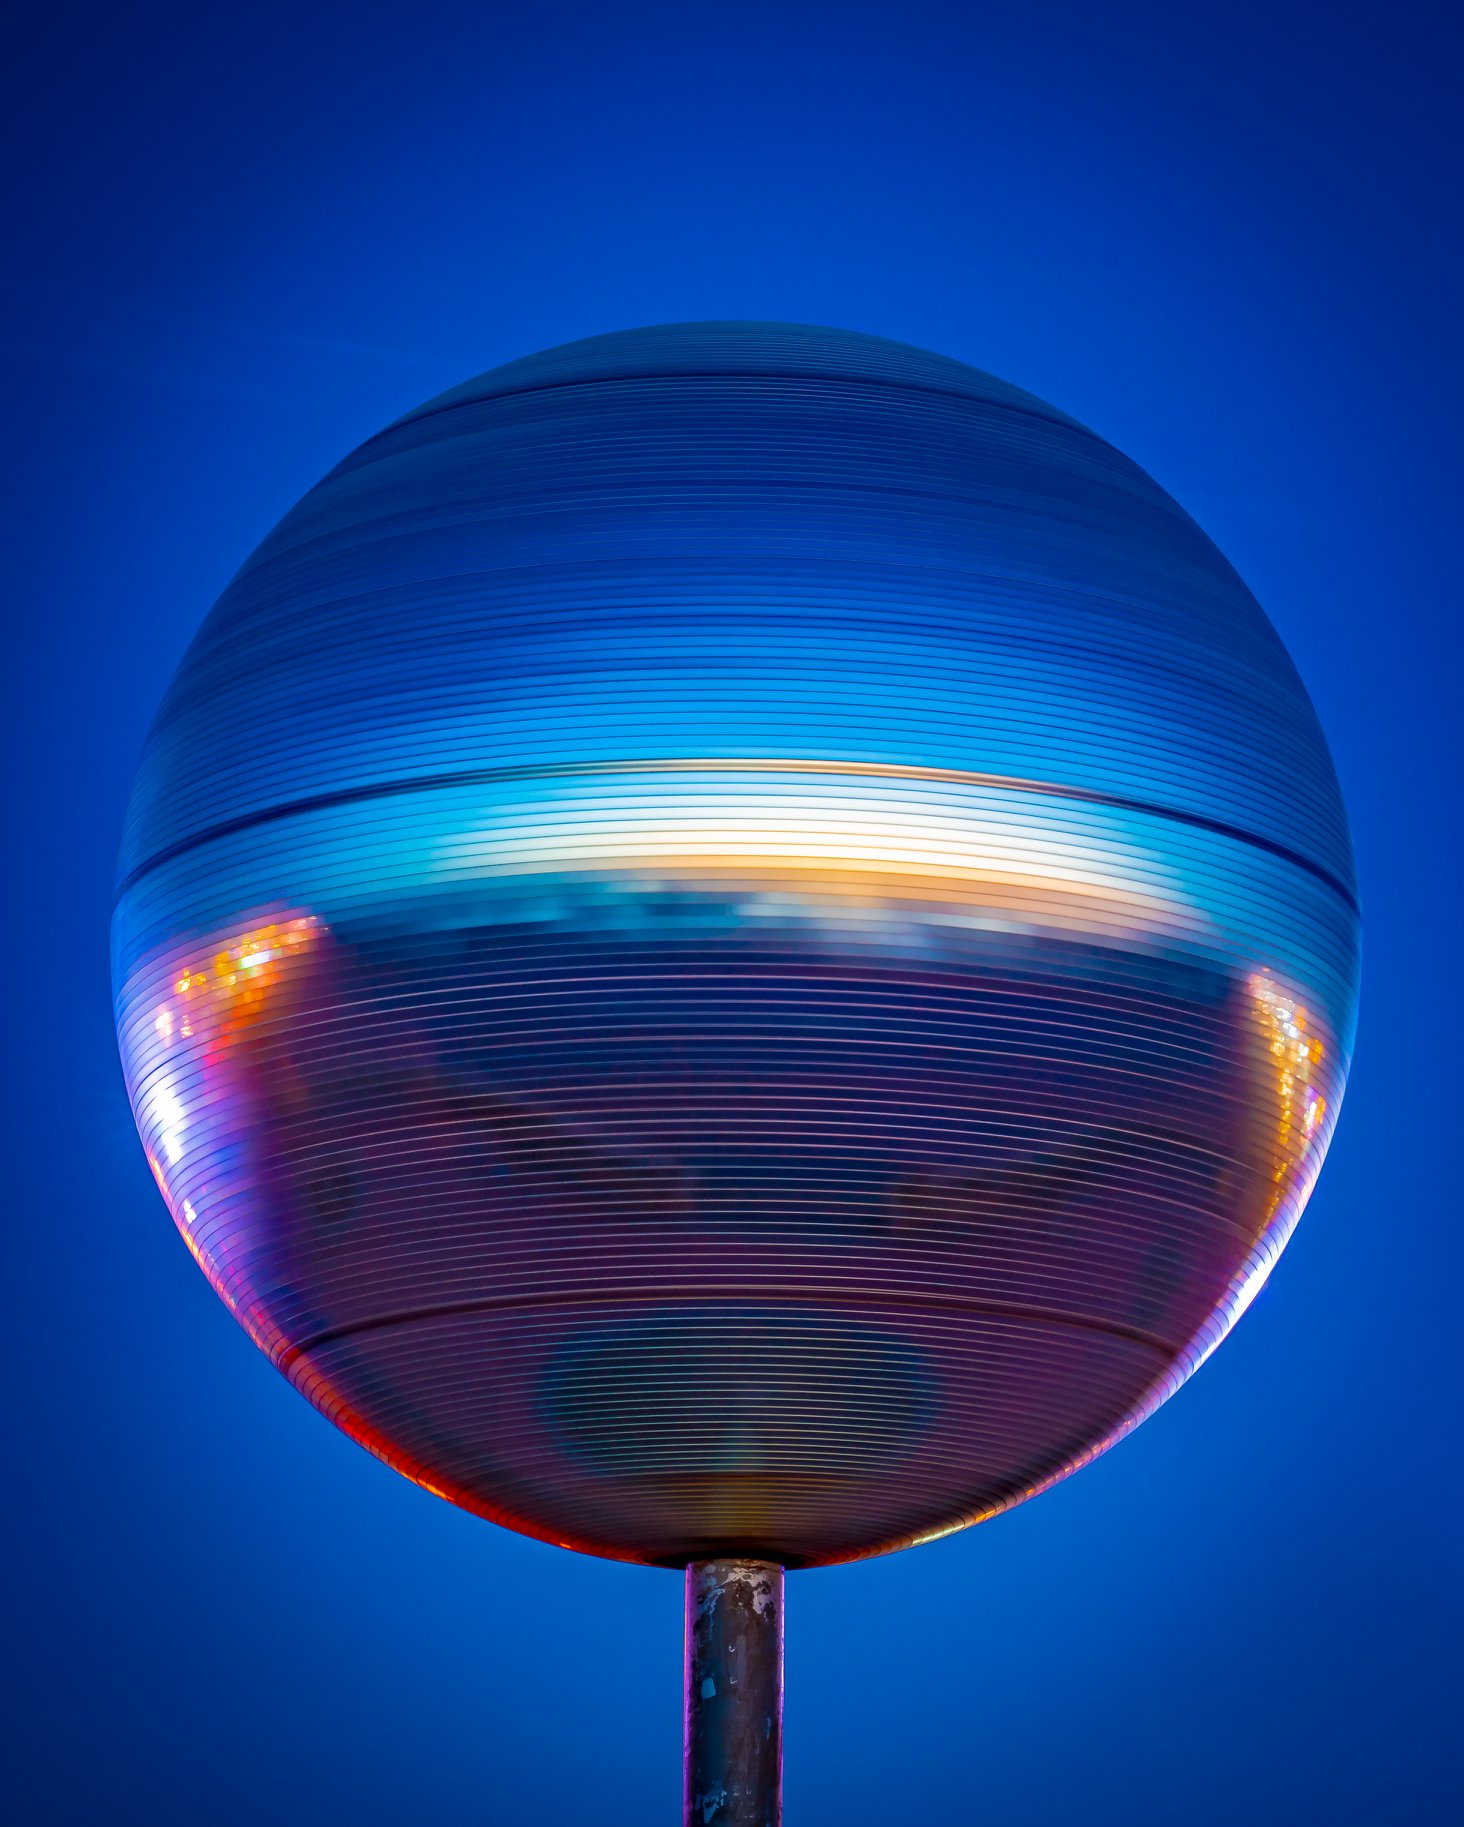 Giant Mirror Ball, Blackpool in the Blue Hour